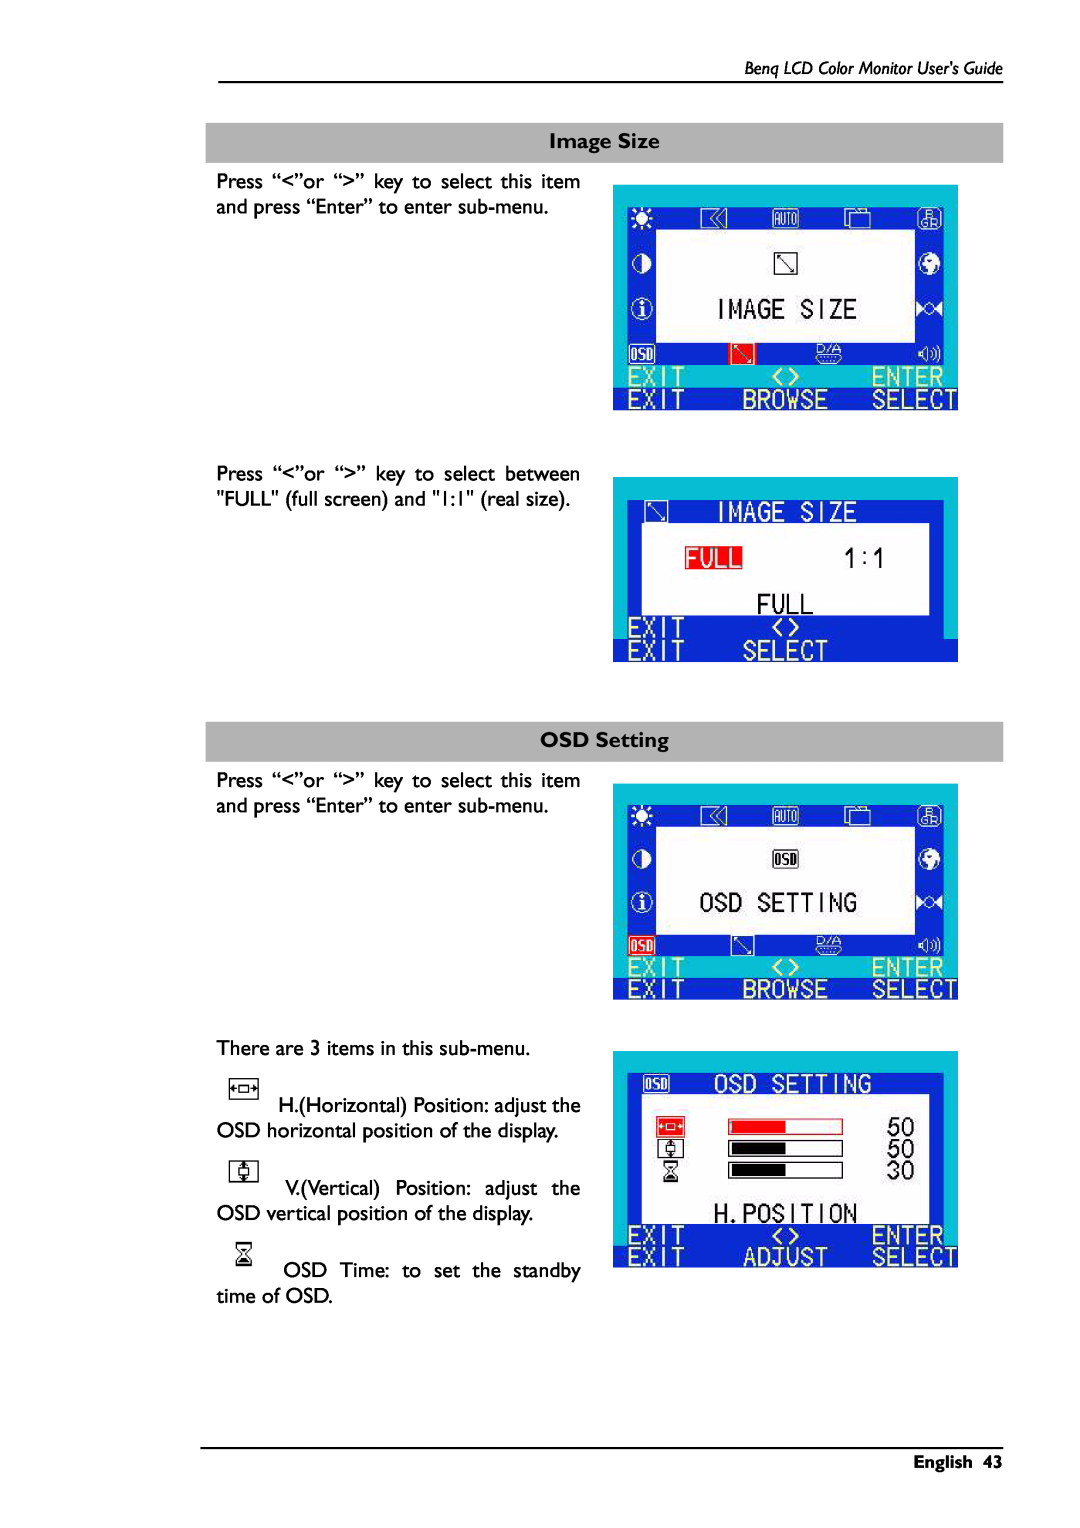 BenQ FP781 user manual Image Size, OSD Setting, Press “”or “” key to select between FULL full screen and 11 real size 